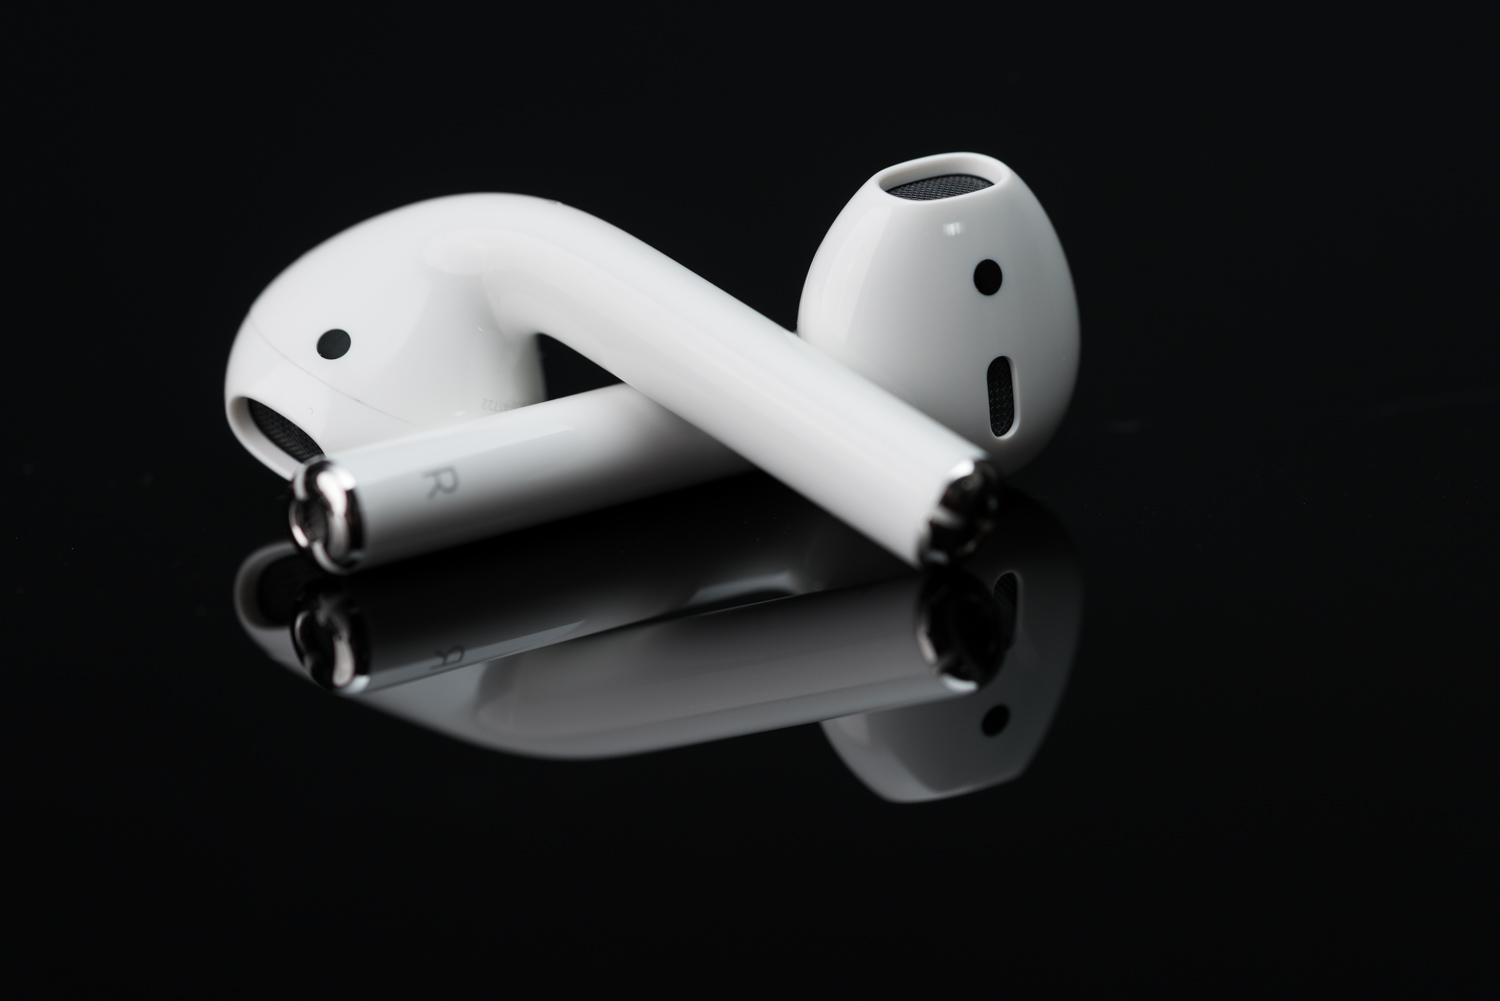 Travel Tech: Apple AirPods First Impressions - Andy's Travel Blog